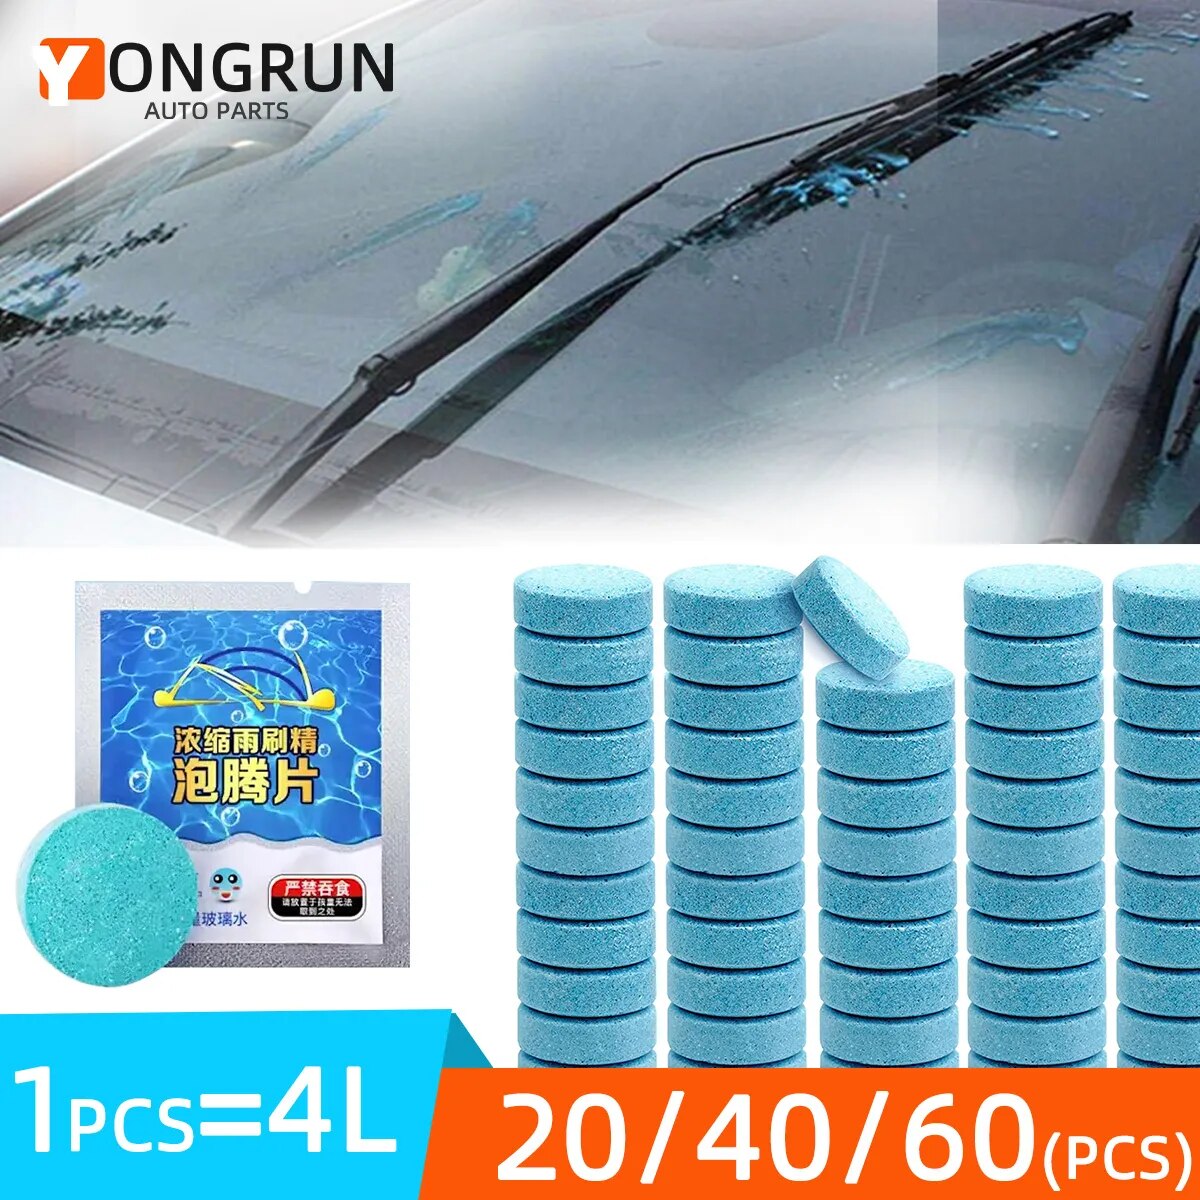 Car Glass Cleaner Tablets